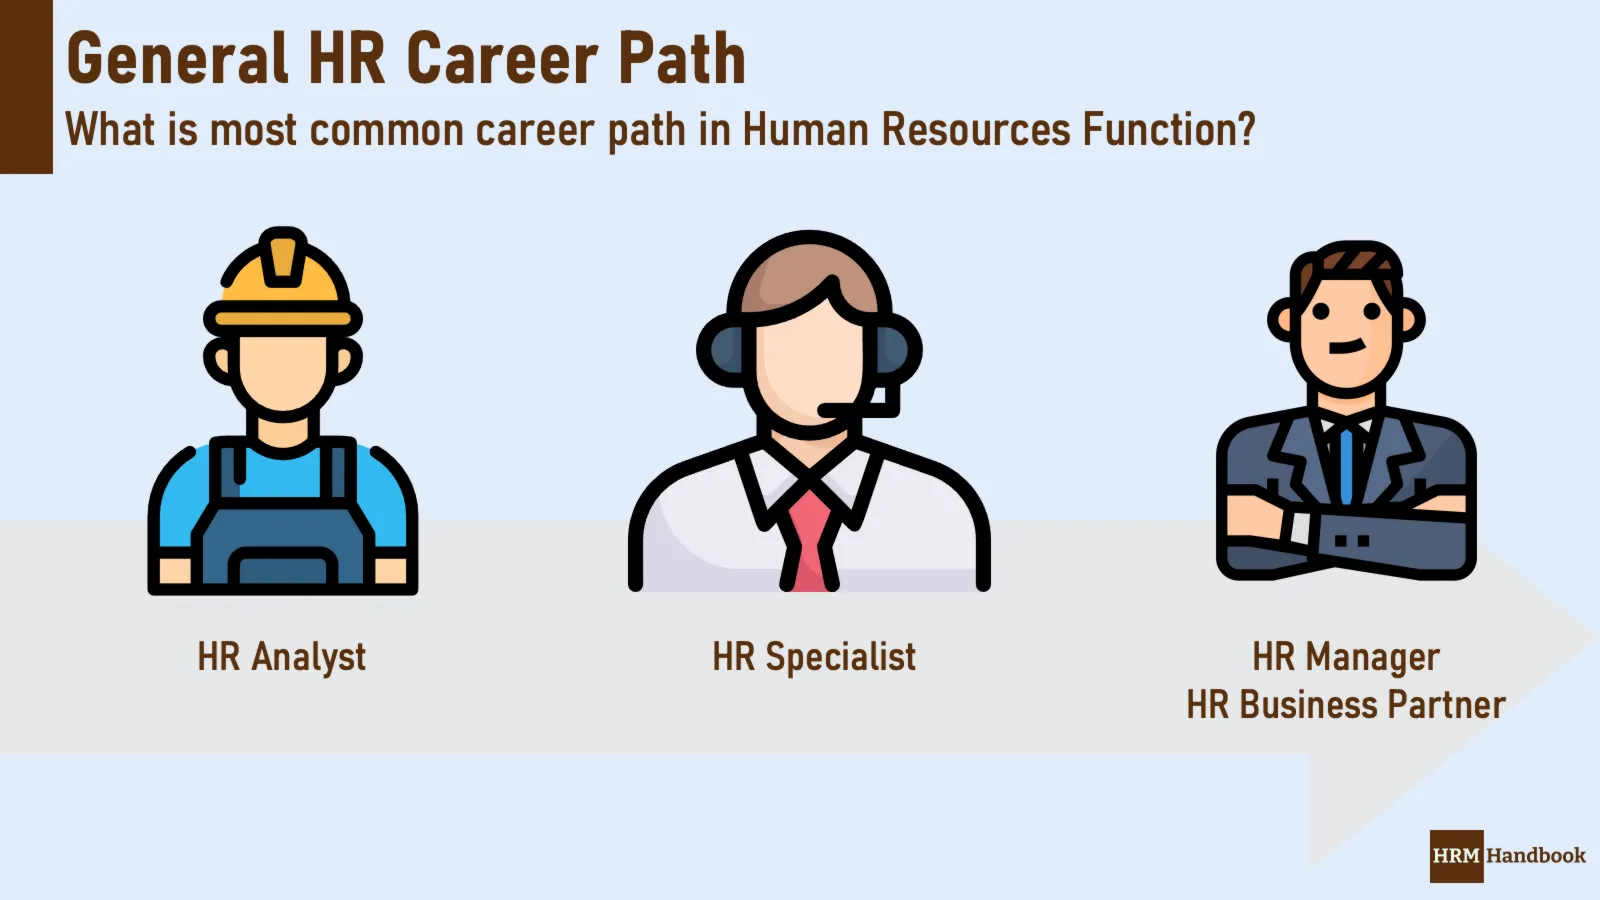 Career Path in Human Resources, starting with HR Analyst up to HR Manager